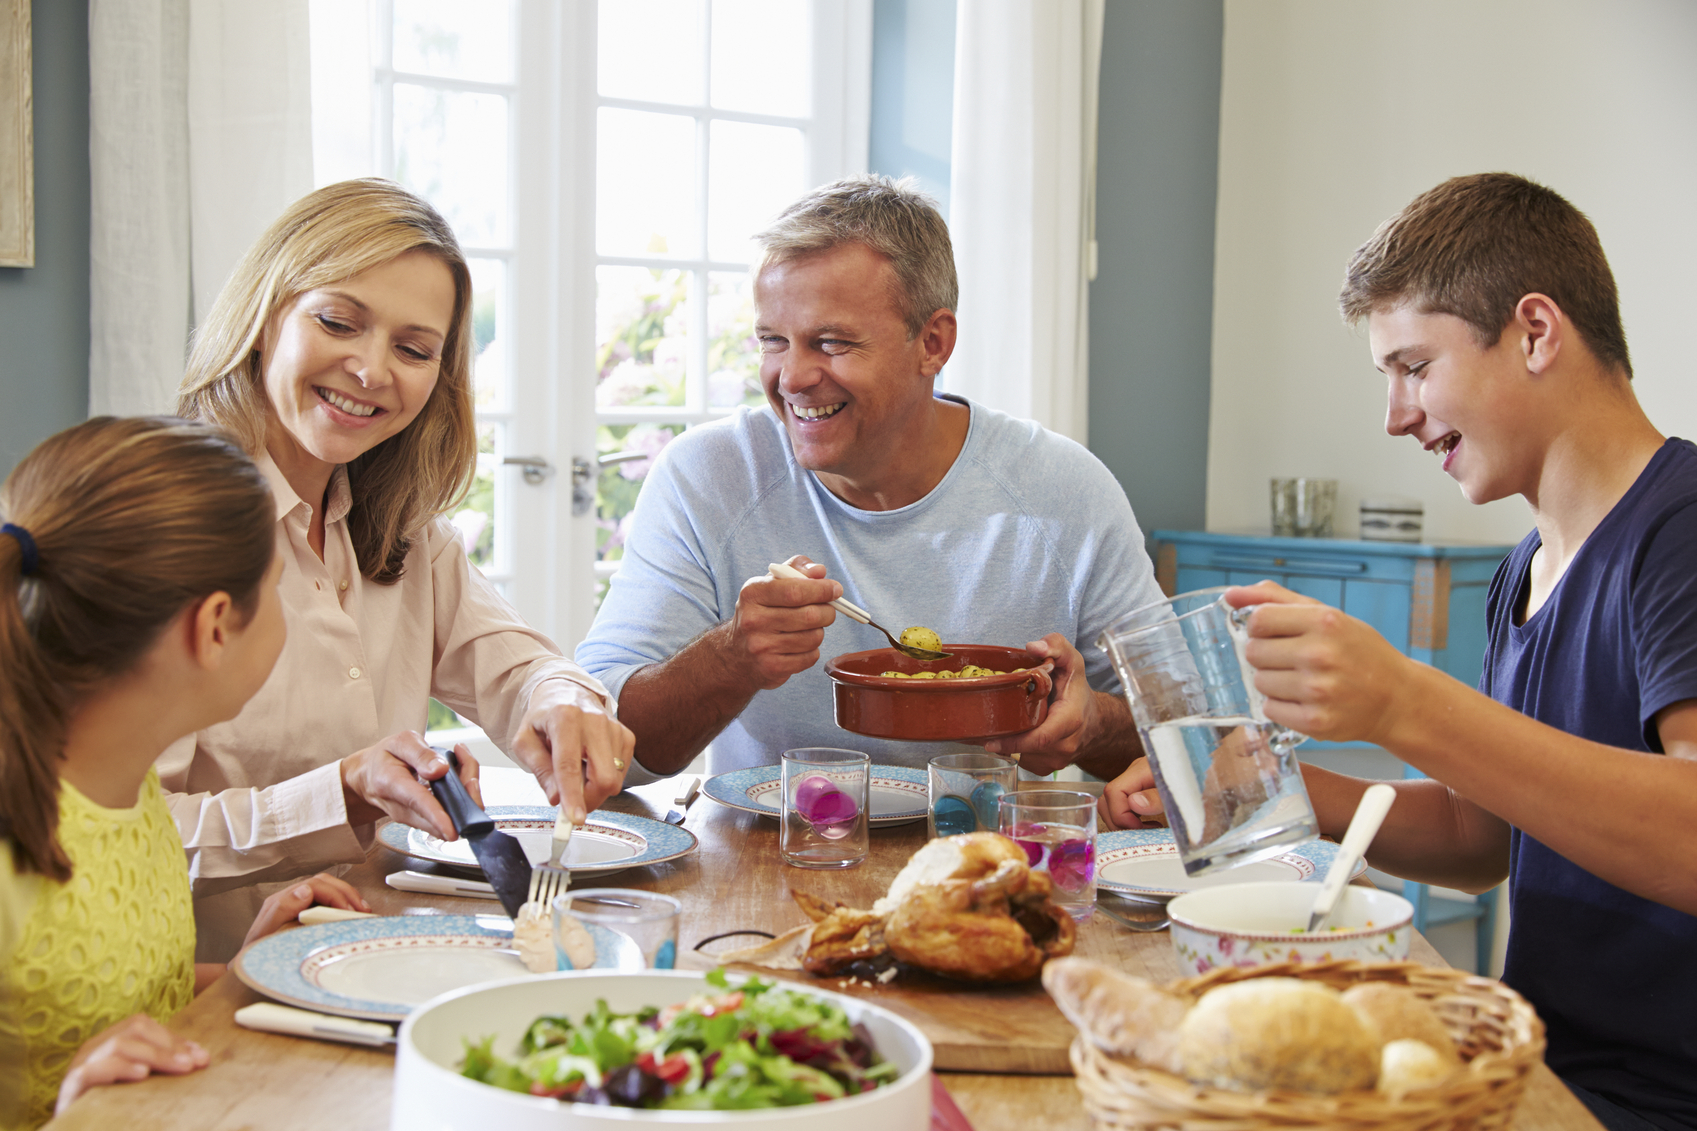 6 Meal Coaching Tips For Parents | Walden Eating Disorders